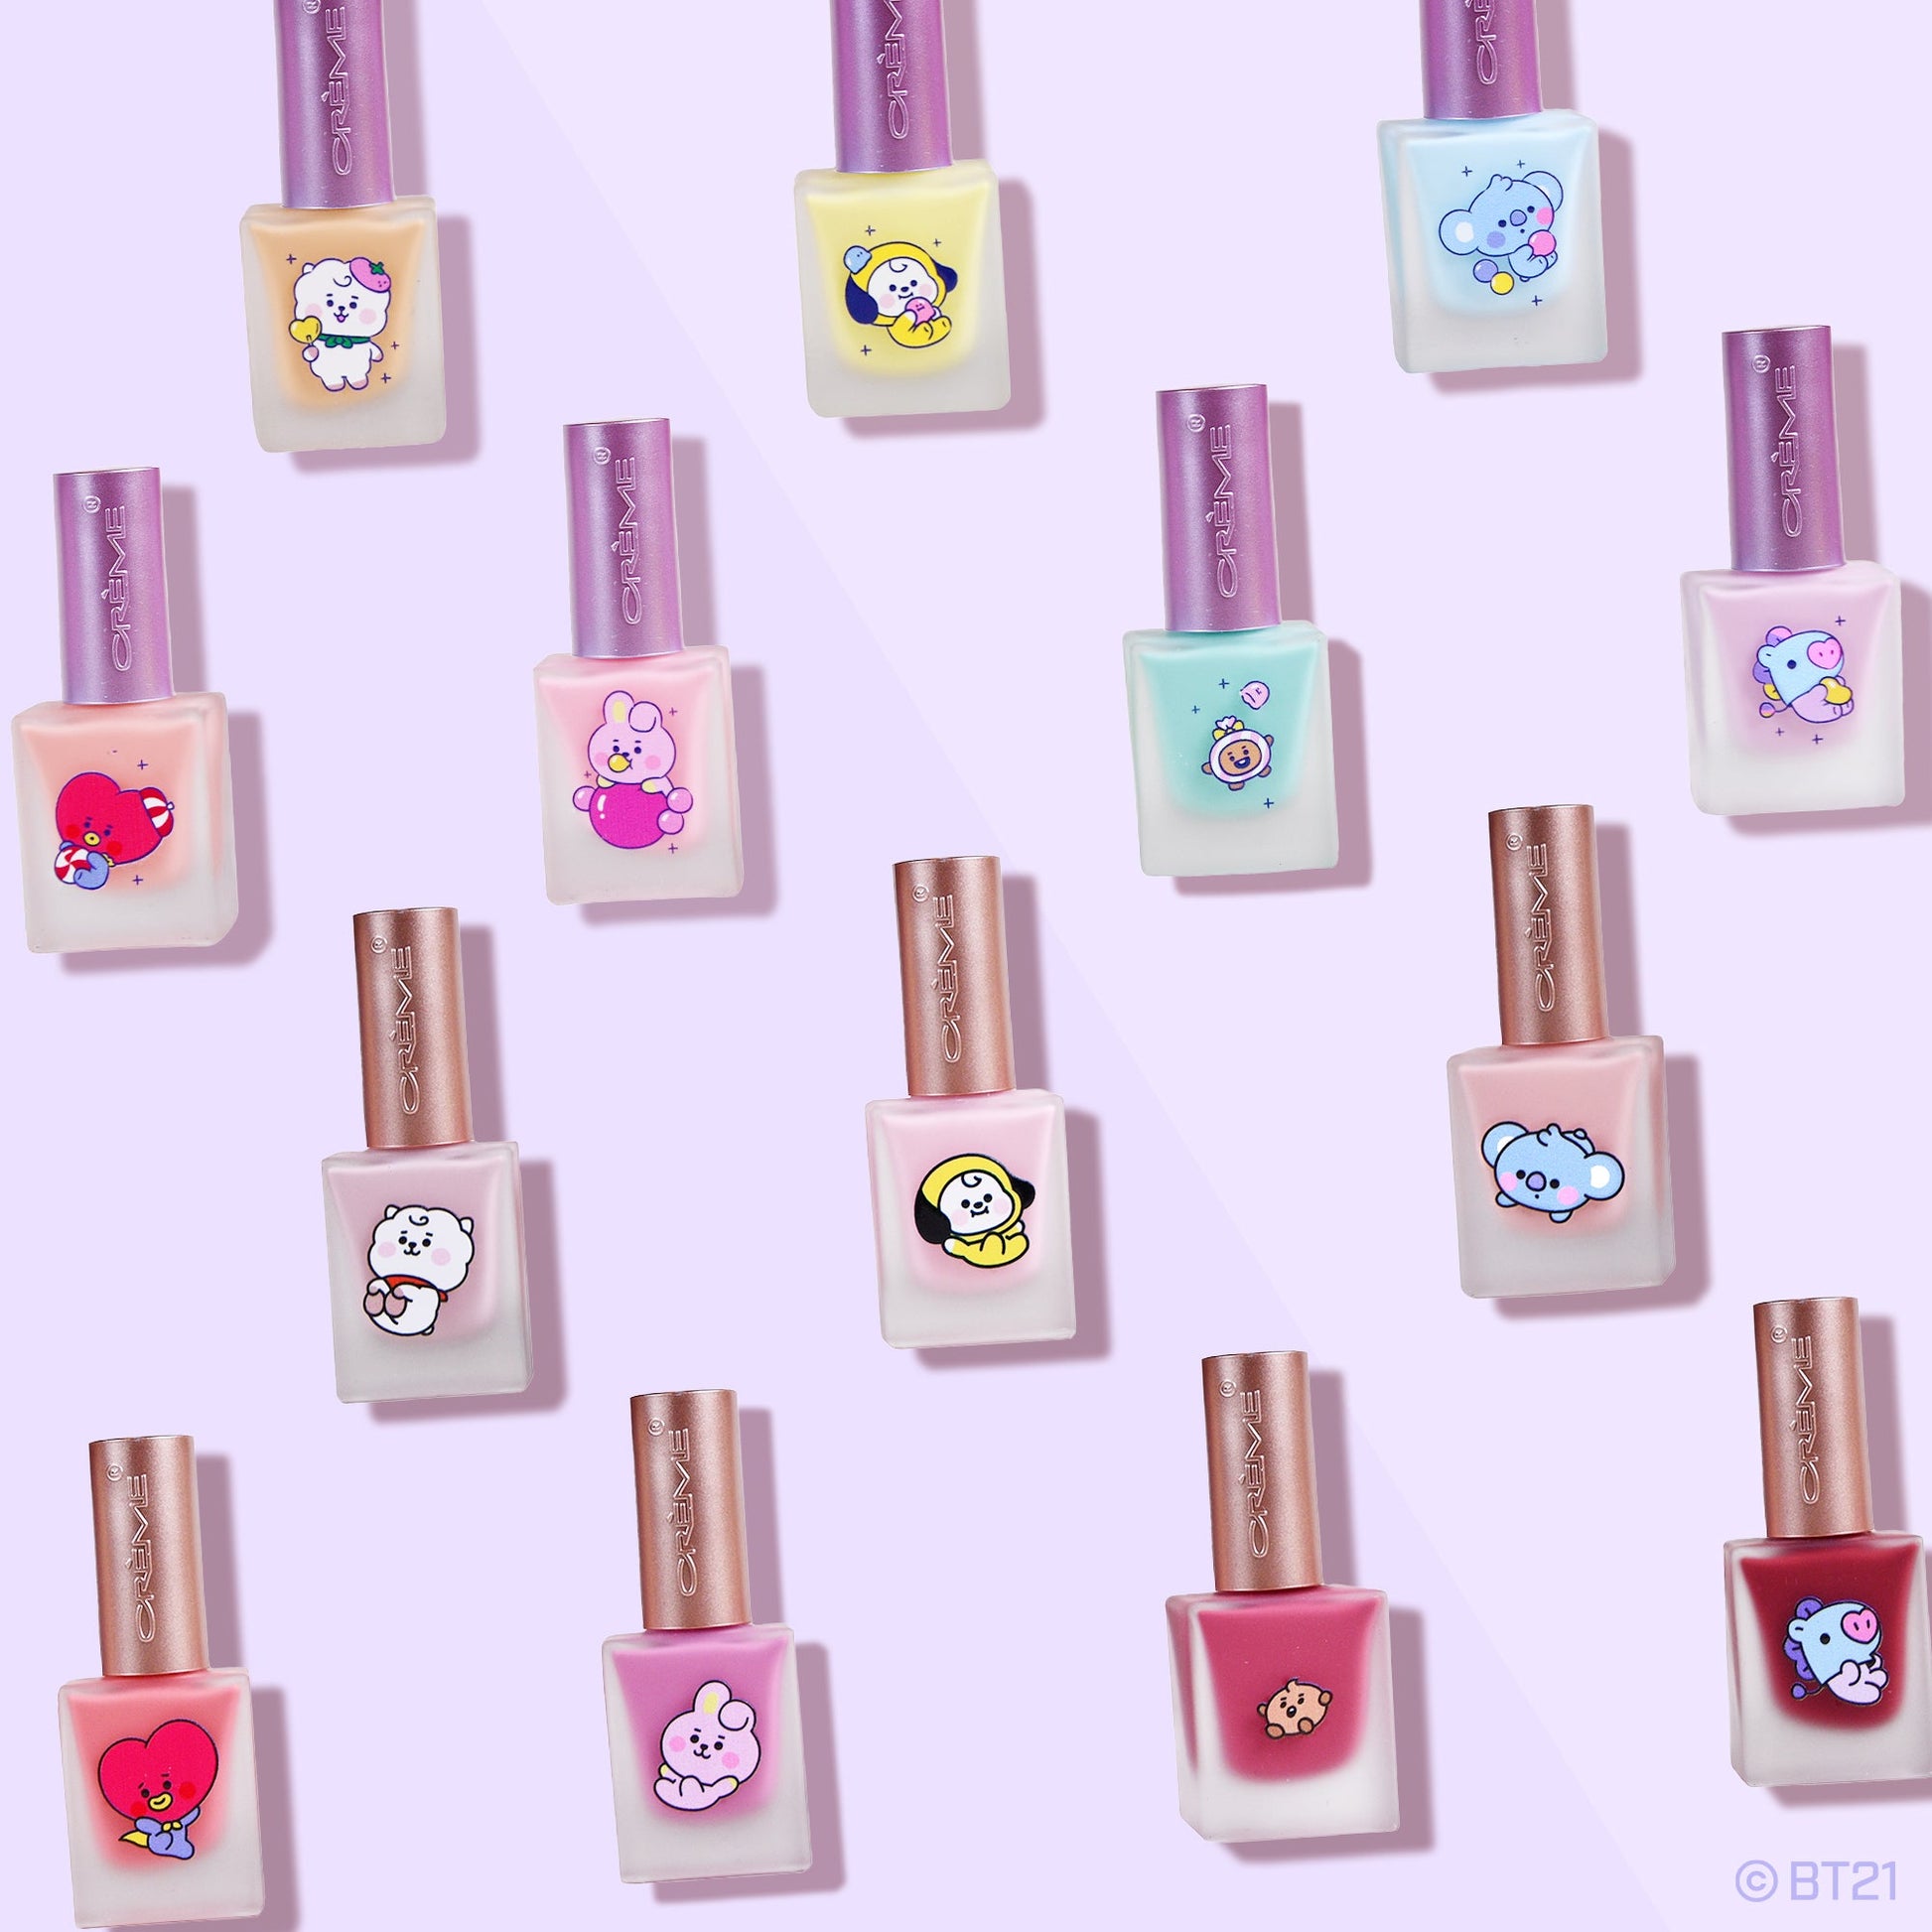 BT21 BABY Gel-Effect Nail Polish Complete Collection (Set of 14) Nail Polishes The Crème Shop x BT21 BABY 